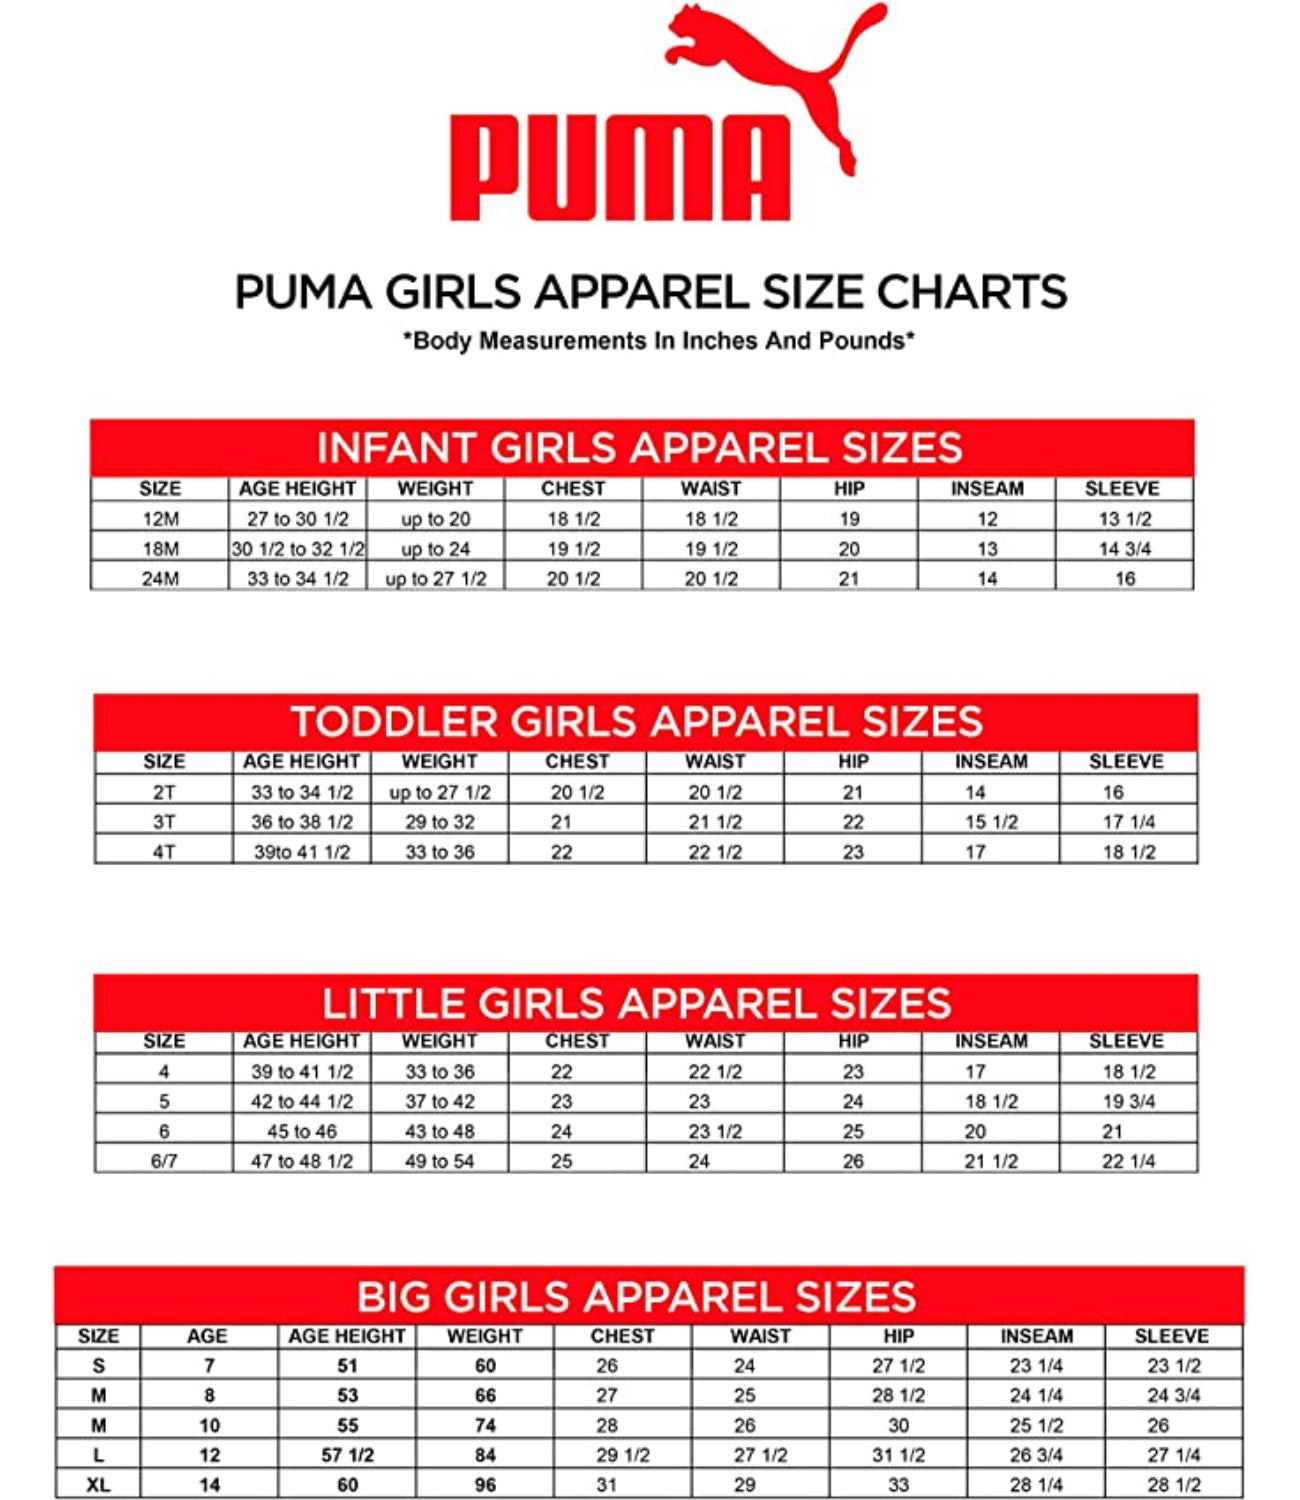 PUMA Girls 4-6X French Terry Colorblock Shorts